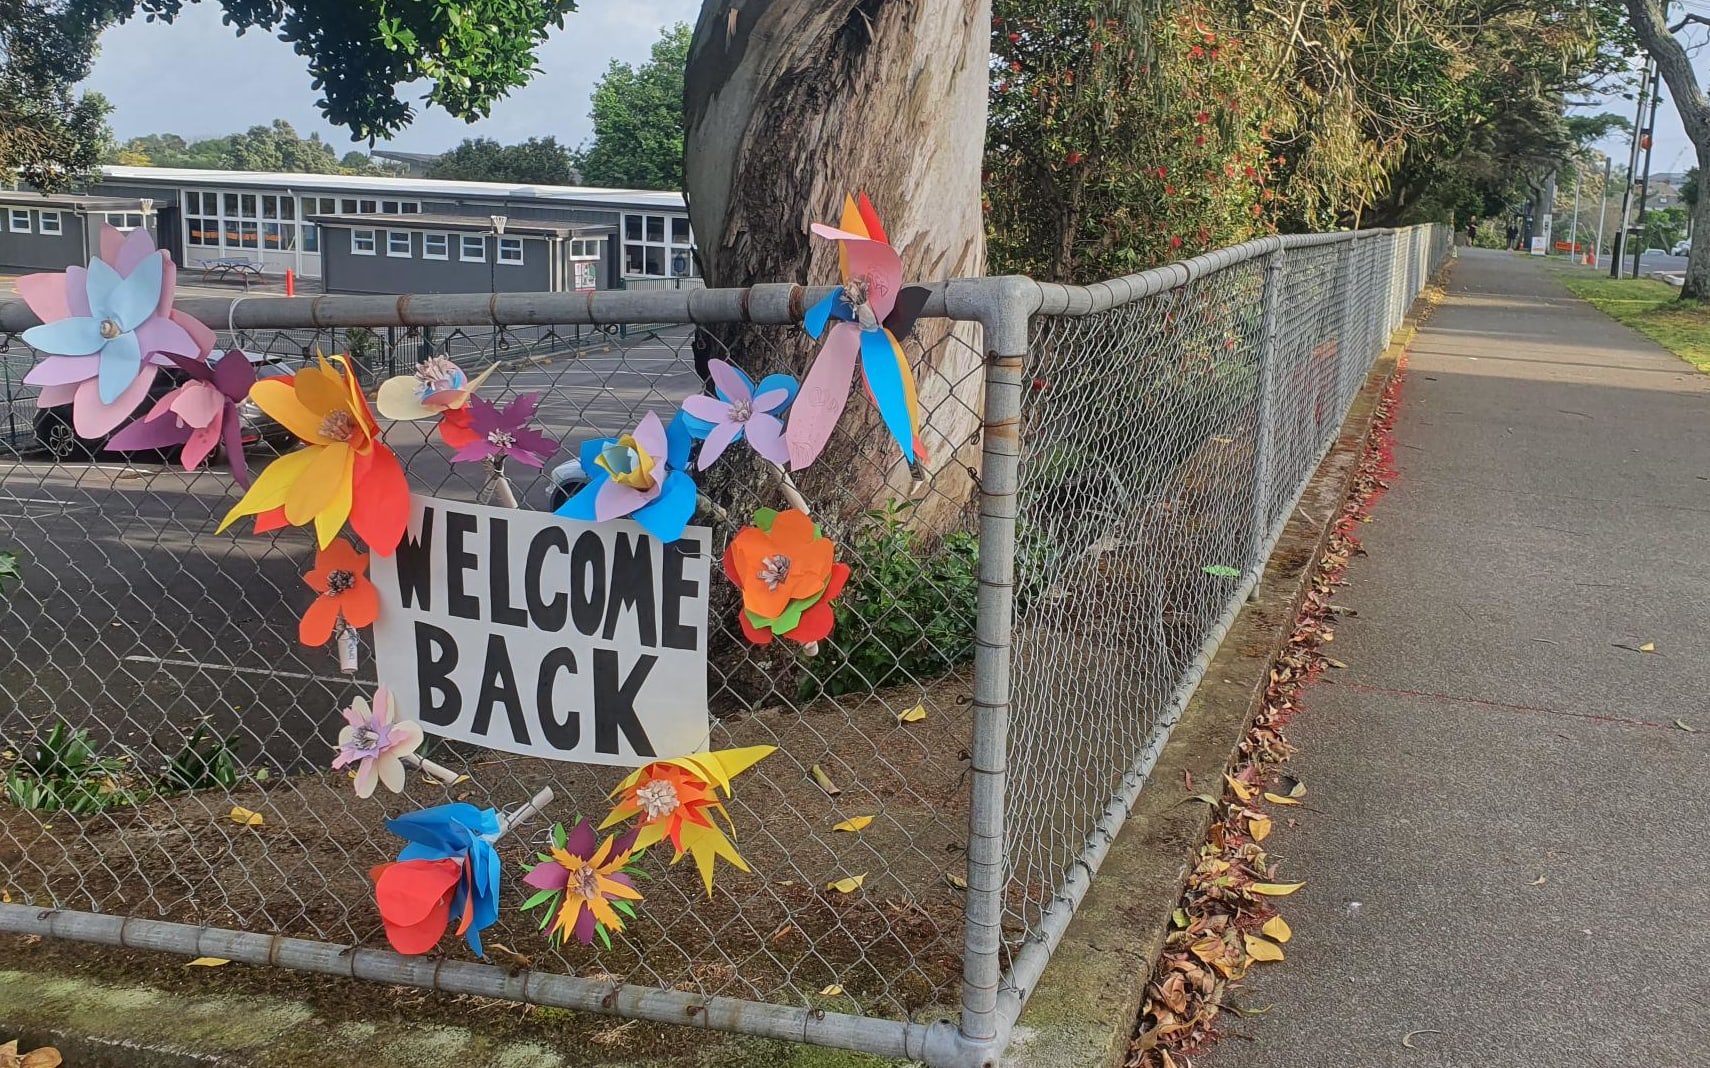 Mount Eden Normal School puts out the welcome sign for returning primary pupils.